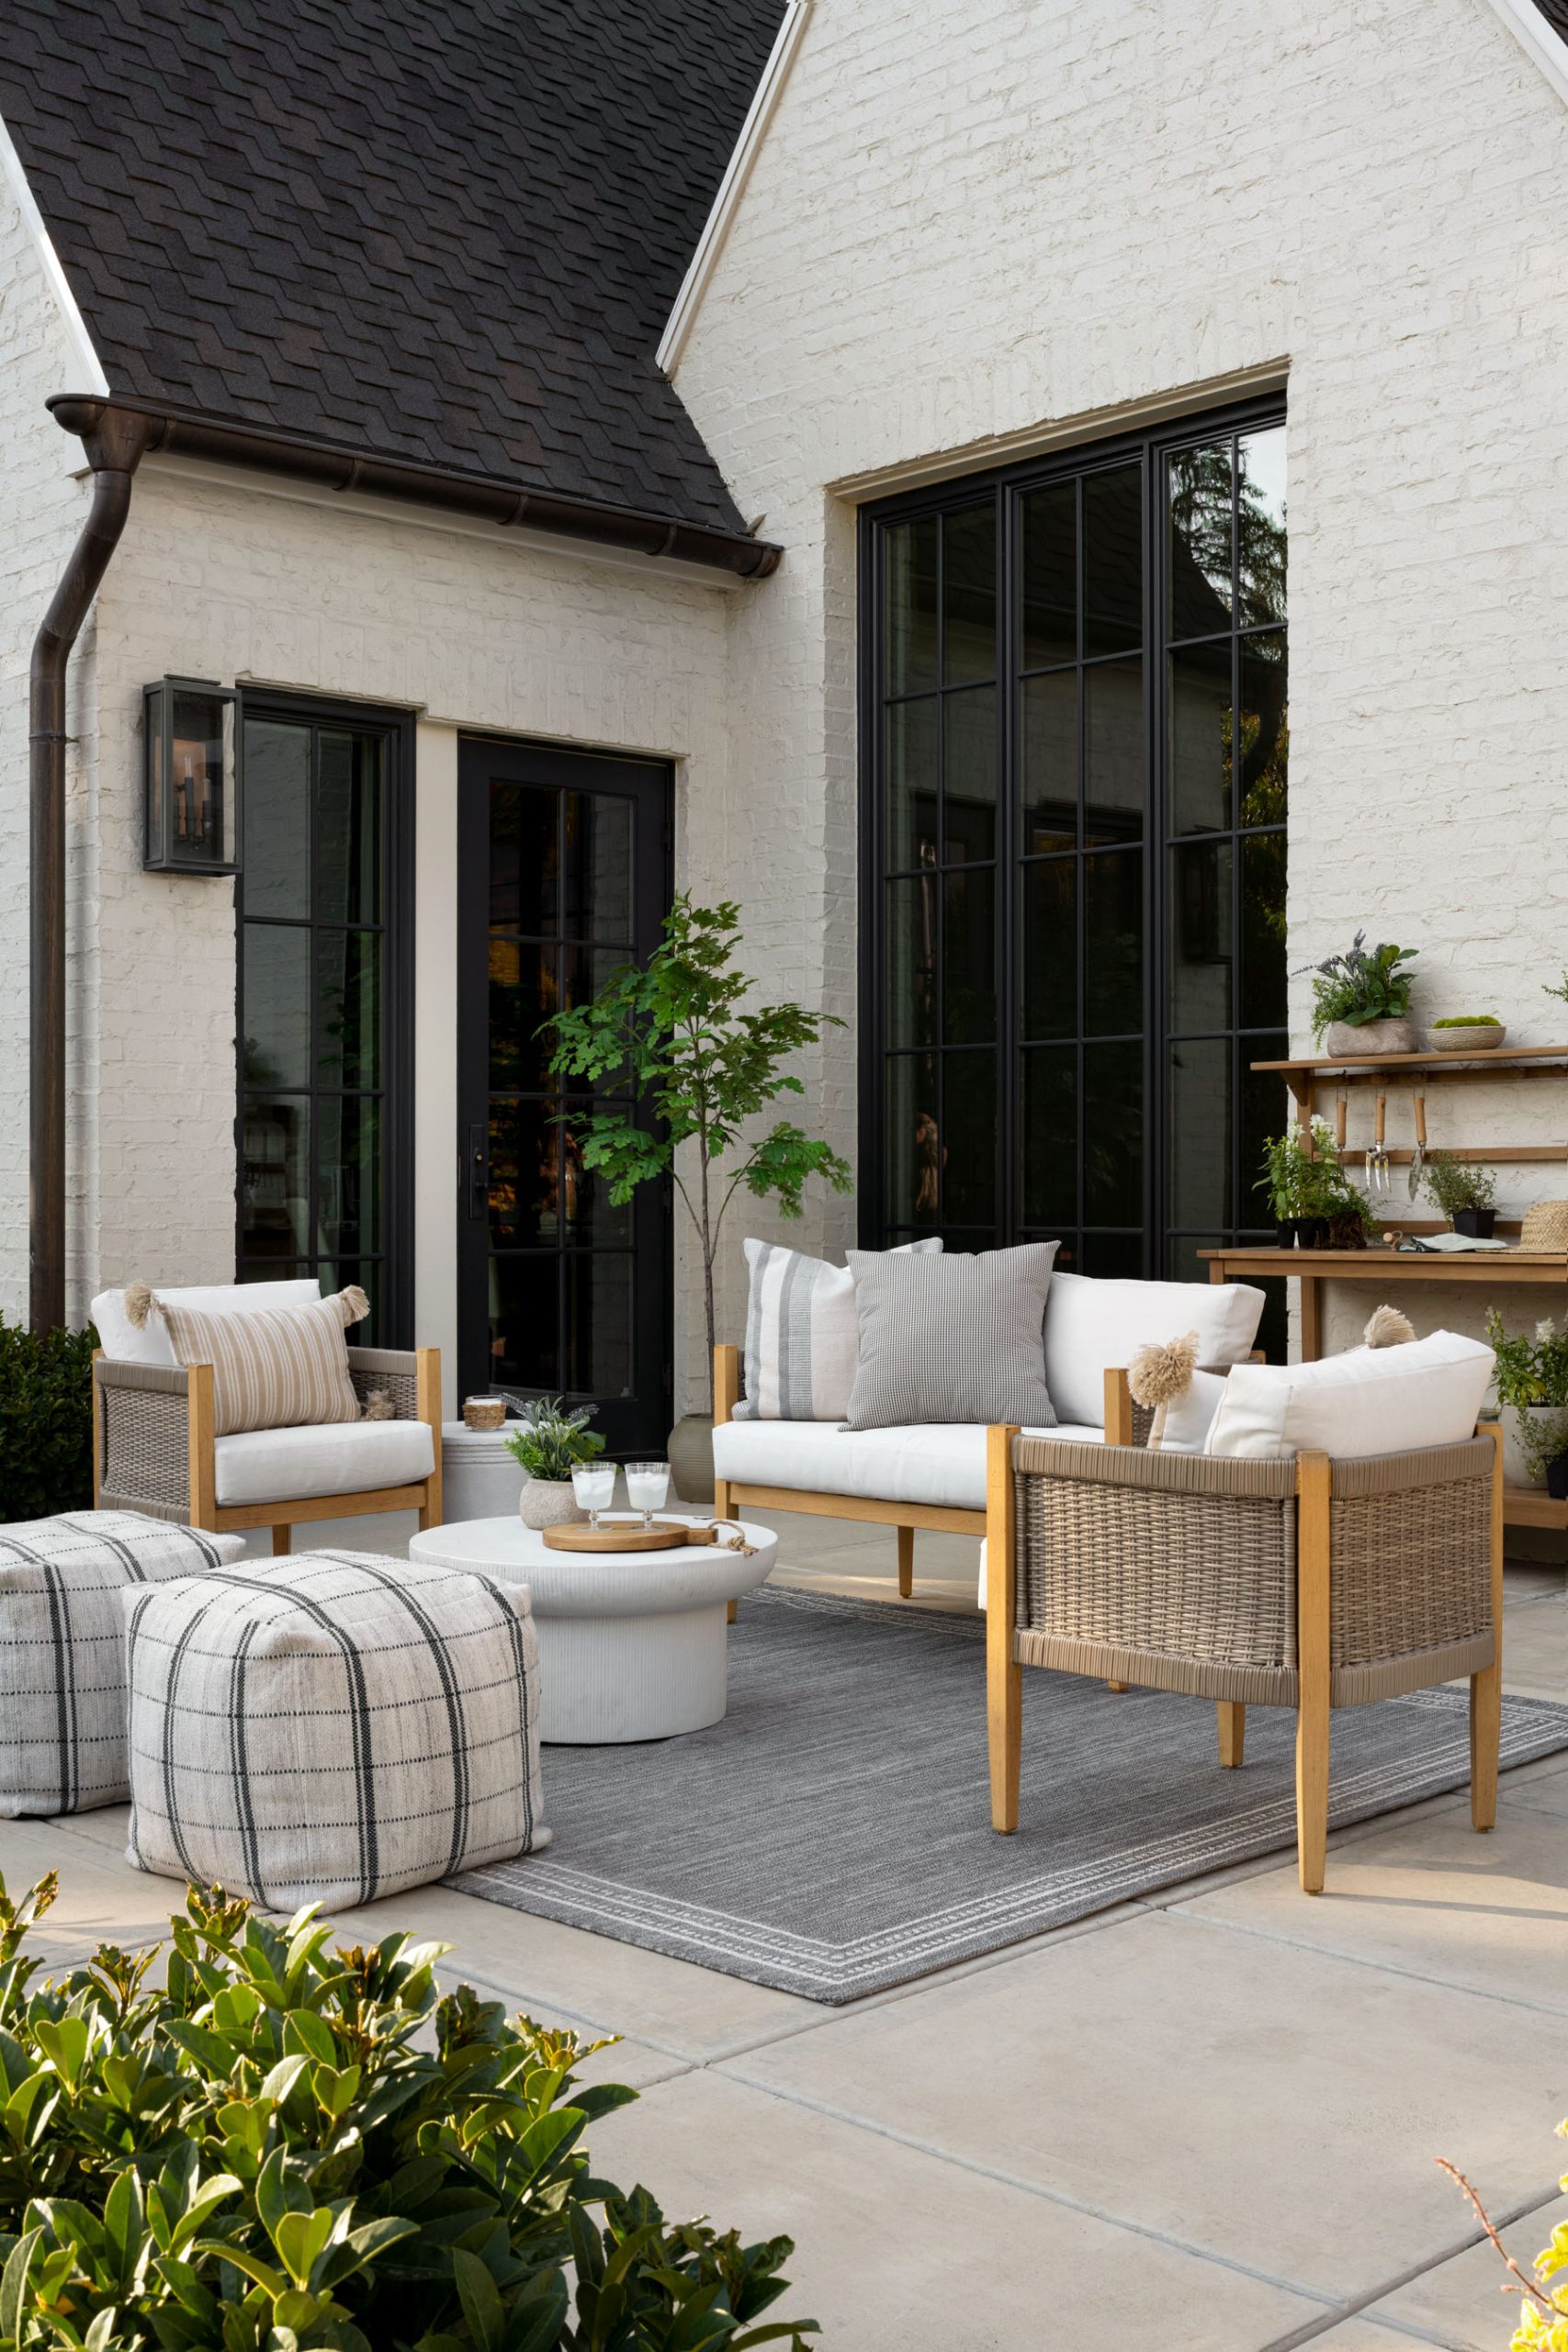 Outdoor living area with sofa and chairs and round table with ottomans